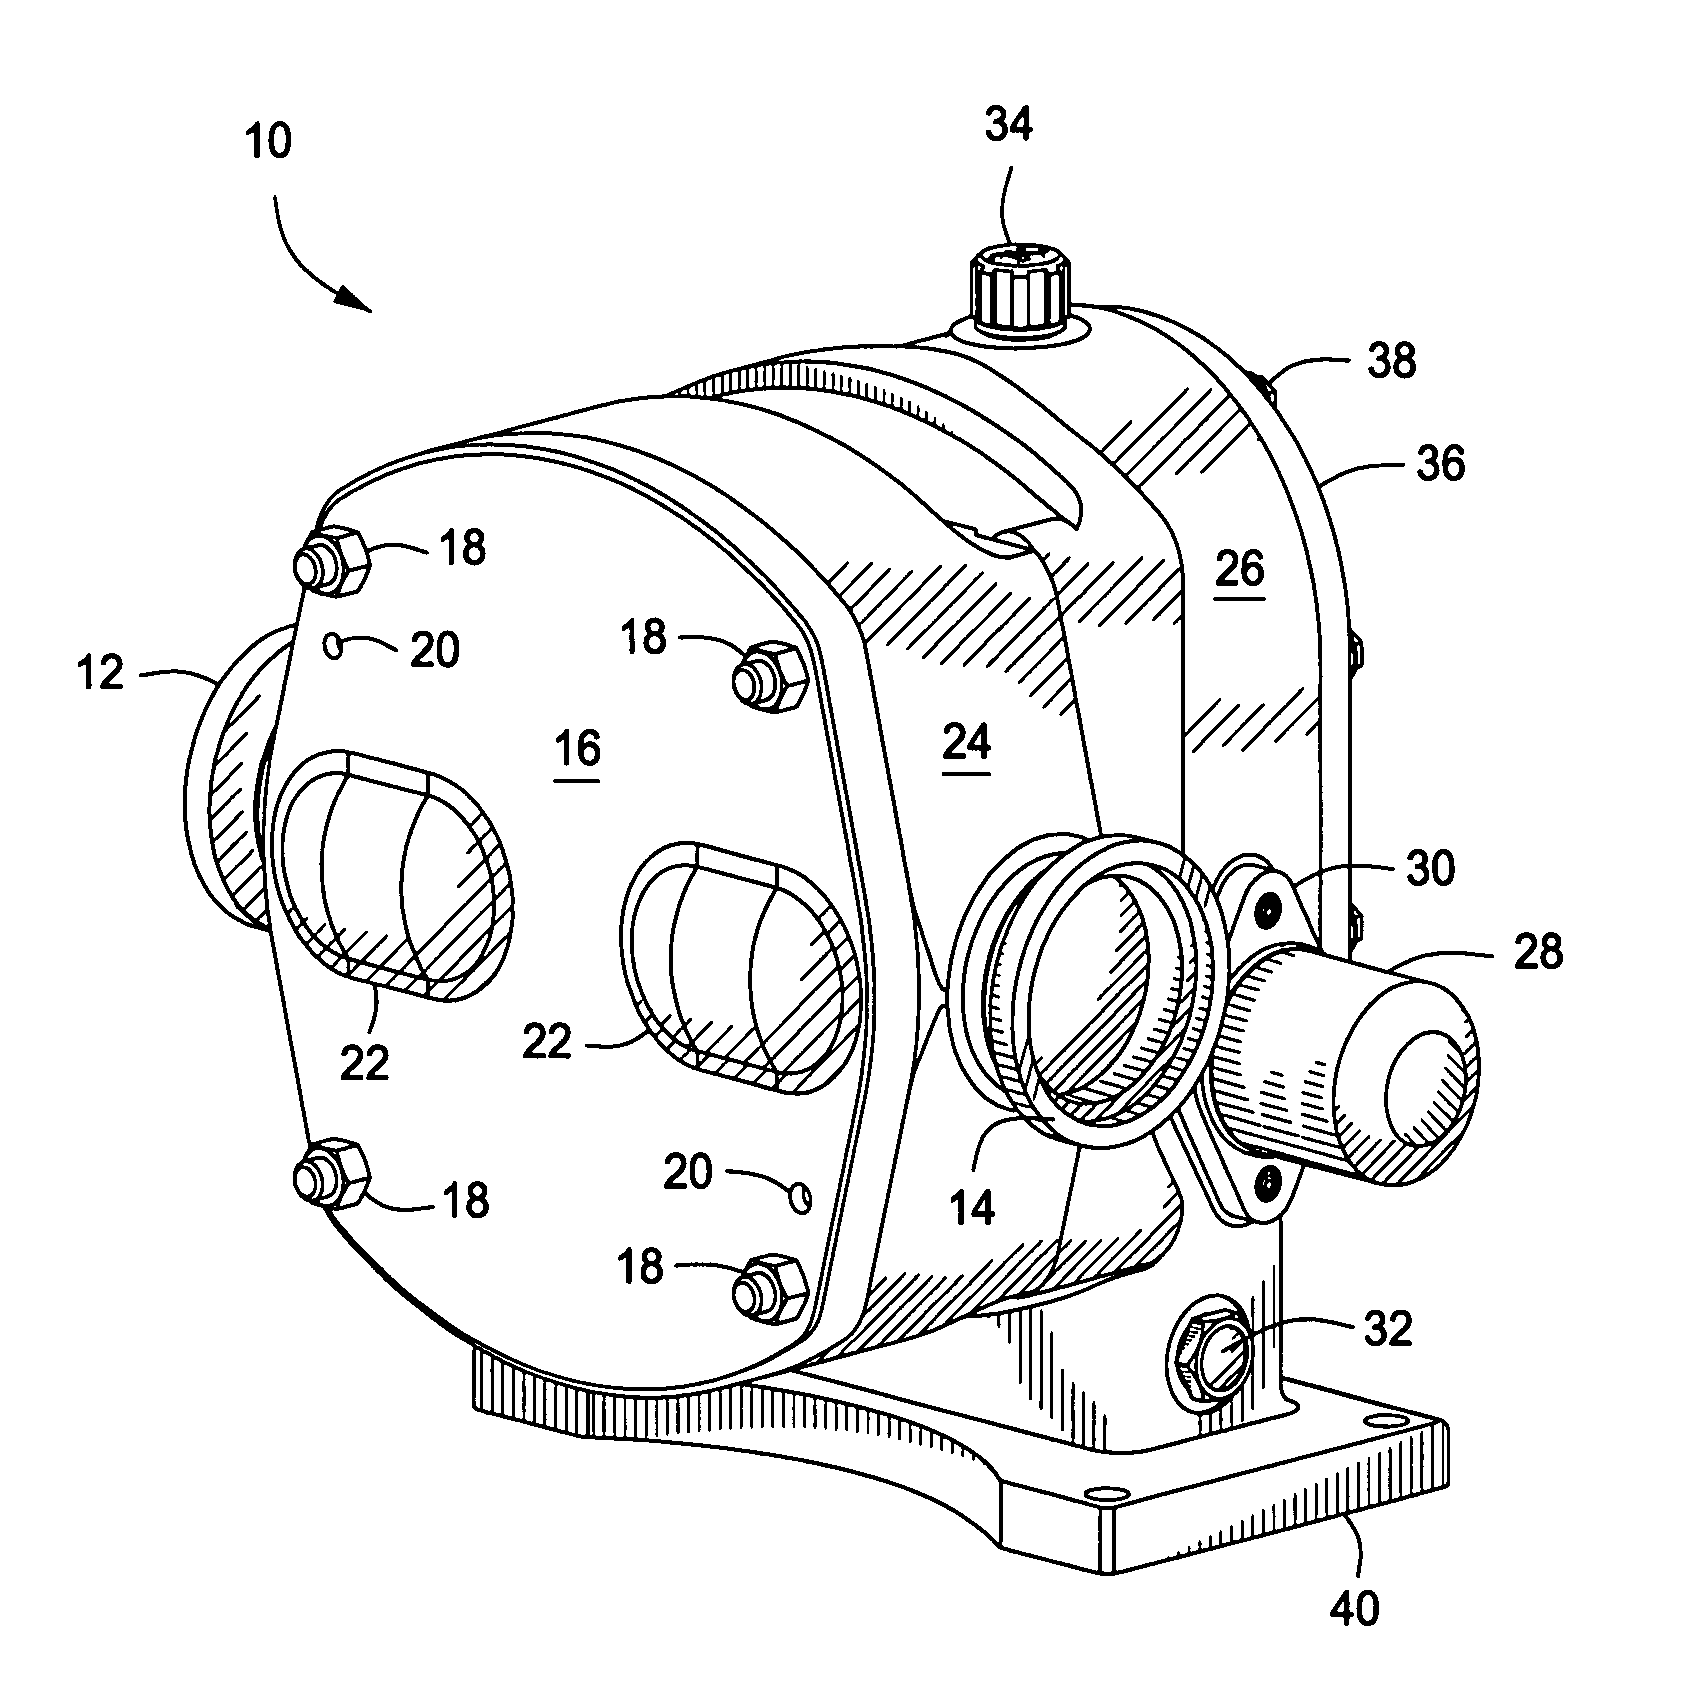 Positive displacement pump apparatus and method